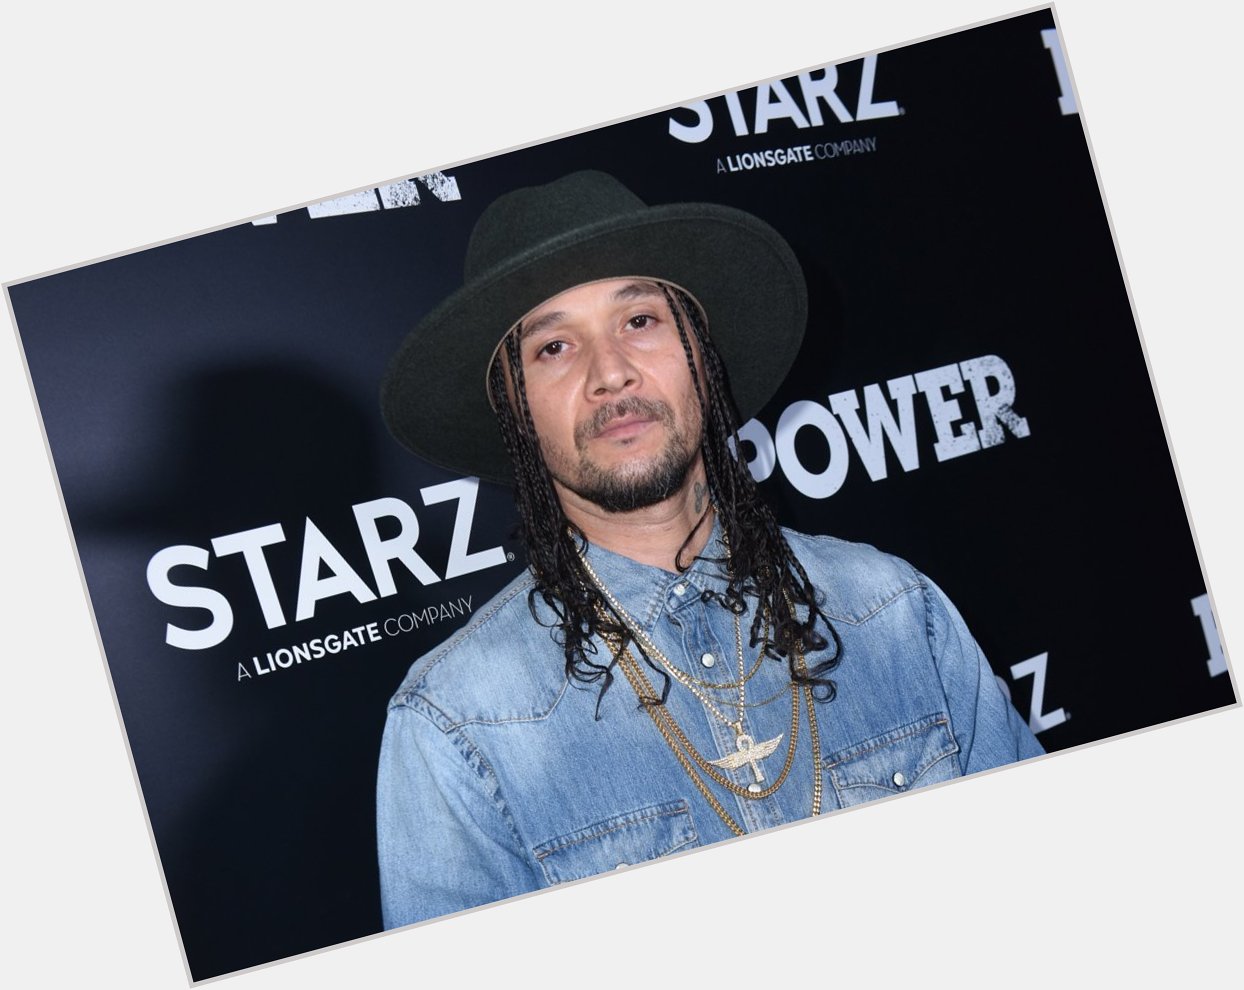 XXL \"Find out how old Bizzy Bone turns today  